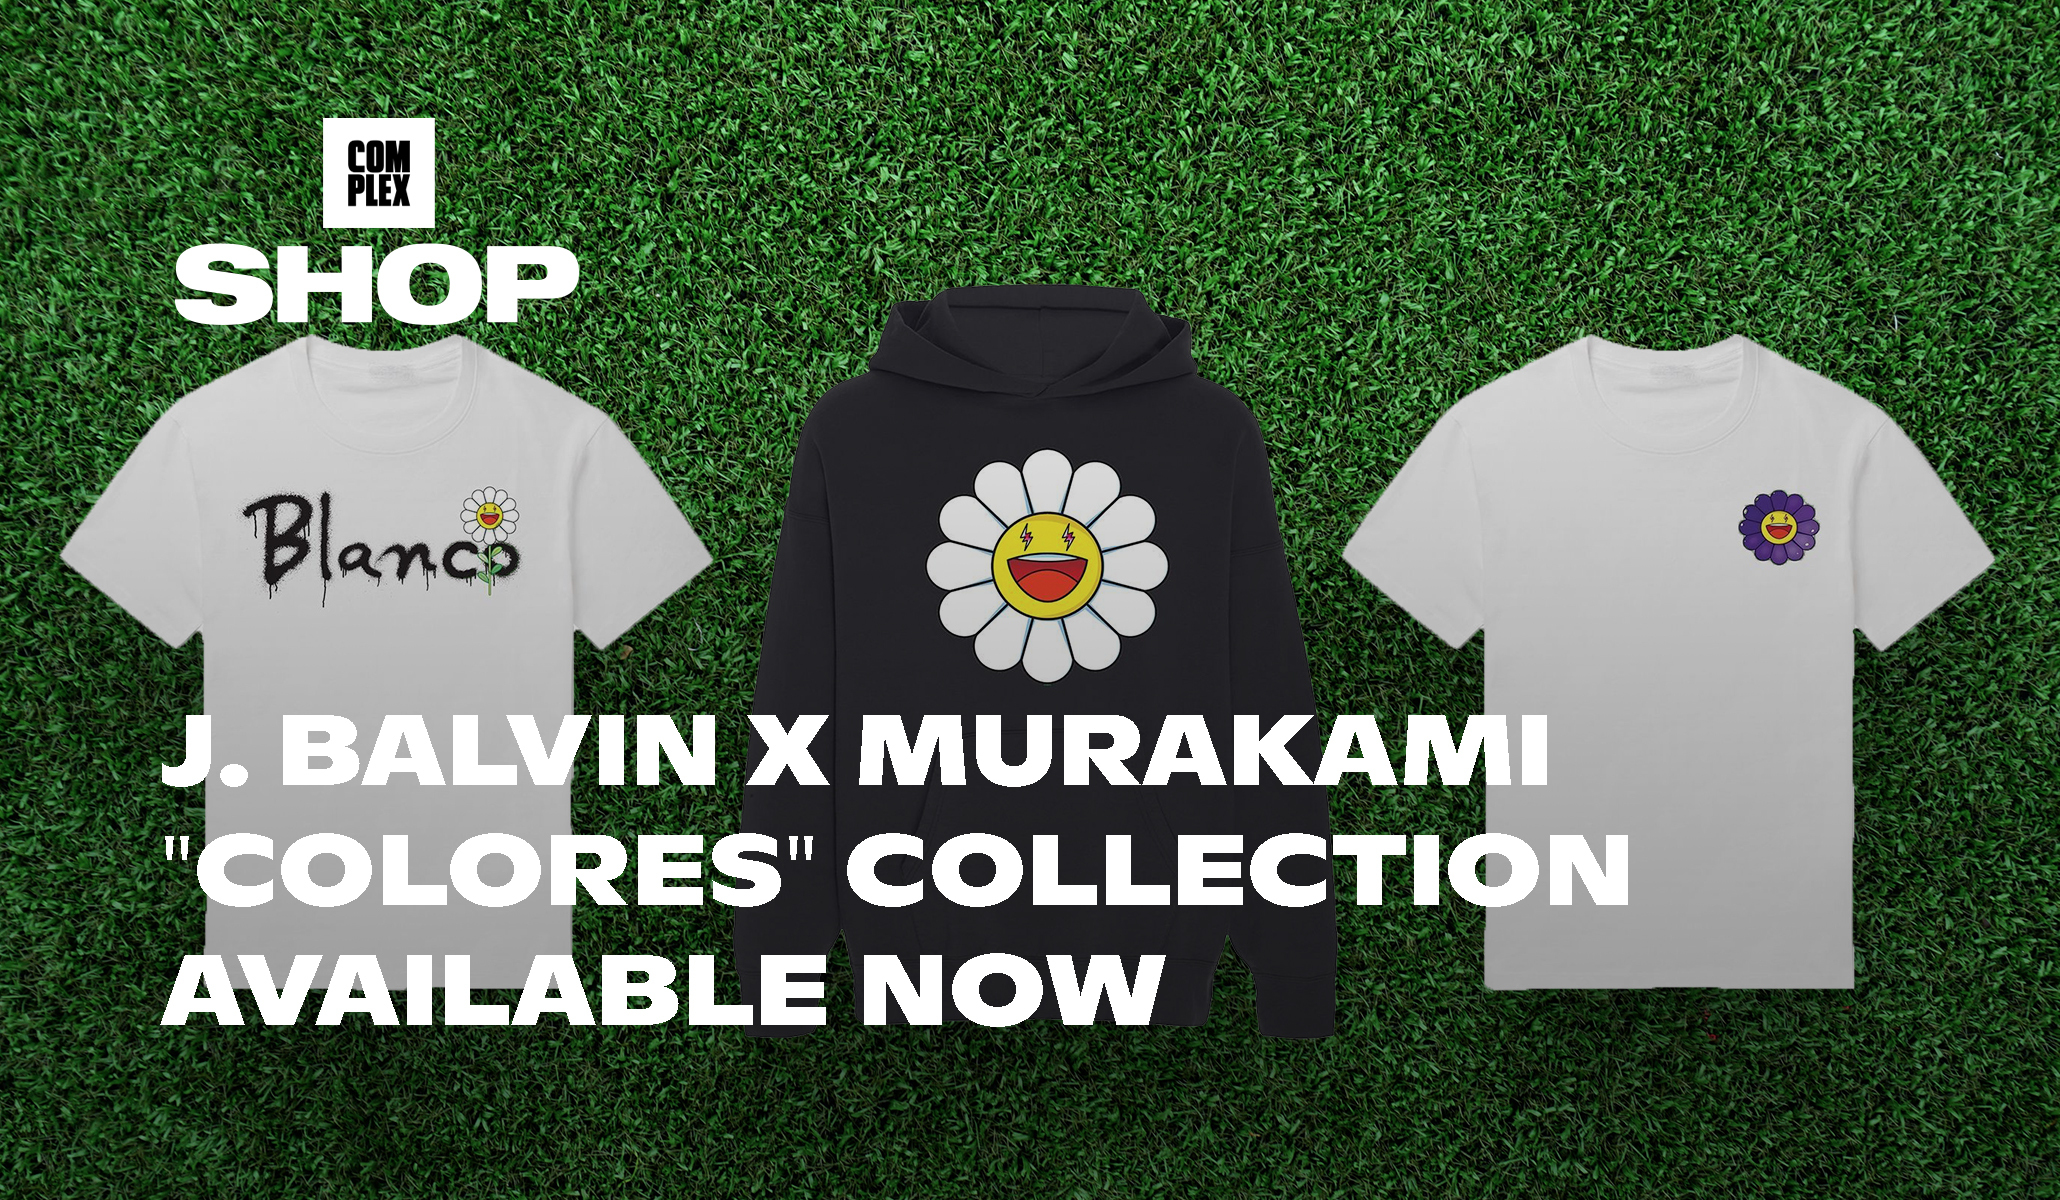 J. Balvin x Murakami “Colores” Merch Is Available Now | Complex